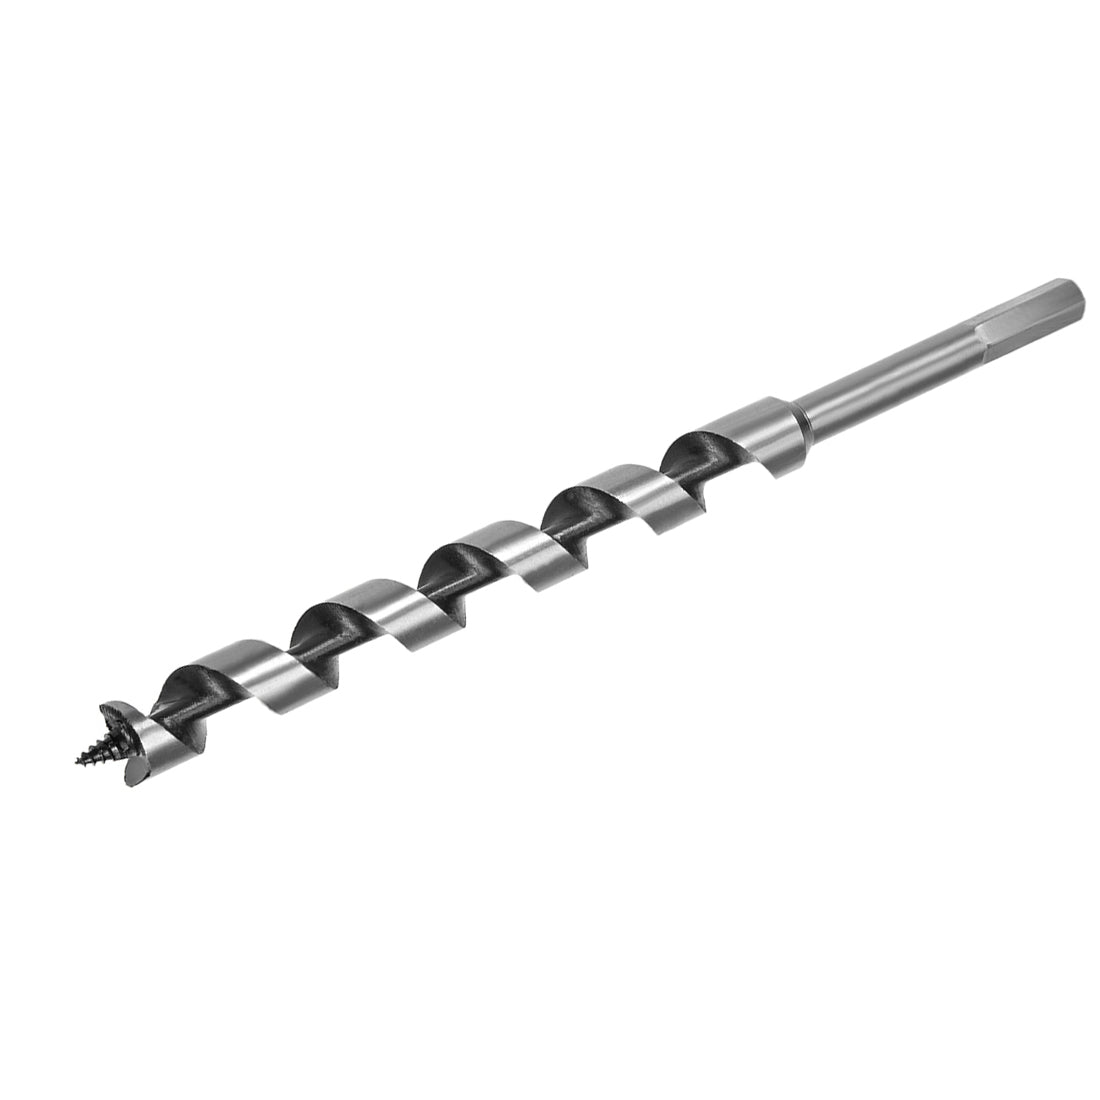 uxcell Uxcell Auger Drill Bit Wood Hex Shank 16mm Cutting Dia High Carbon Steel for Electric Bench Drill Woodworking Carpentry